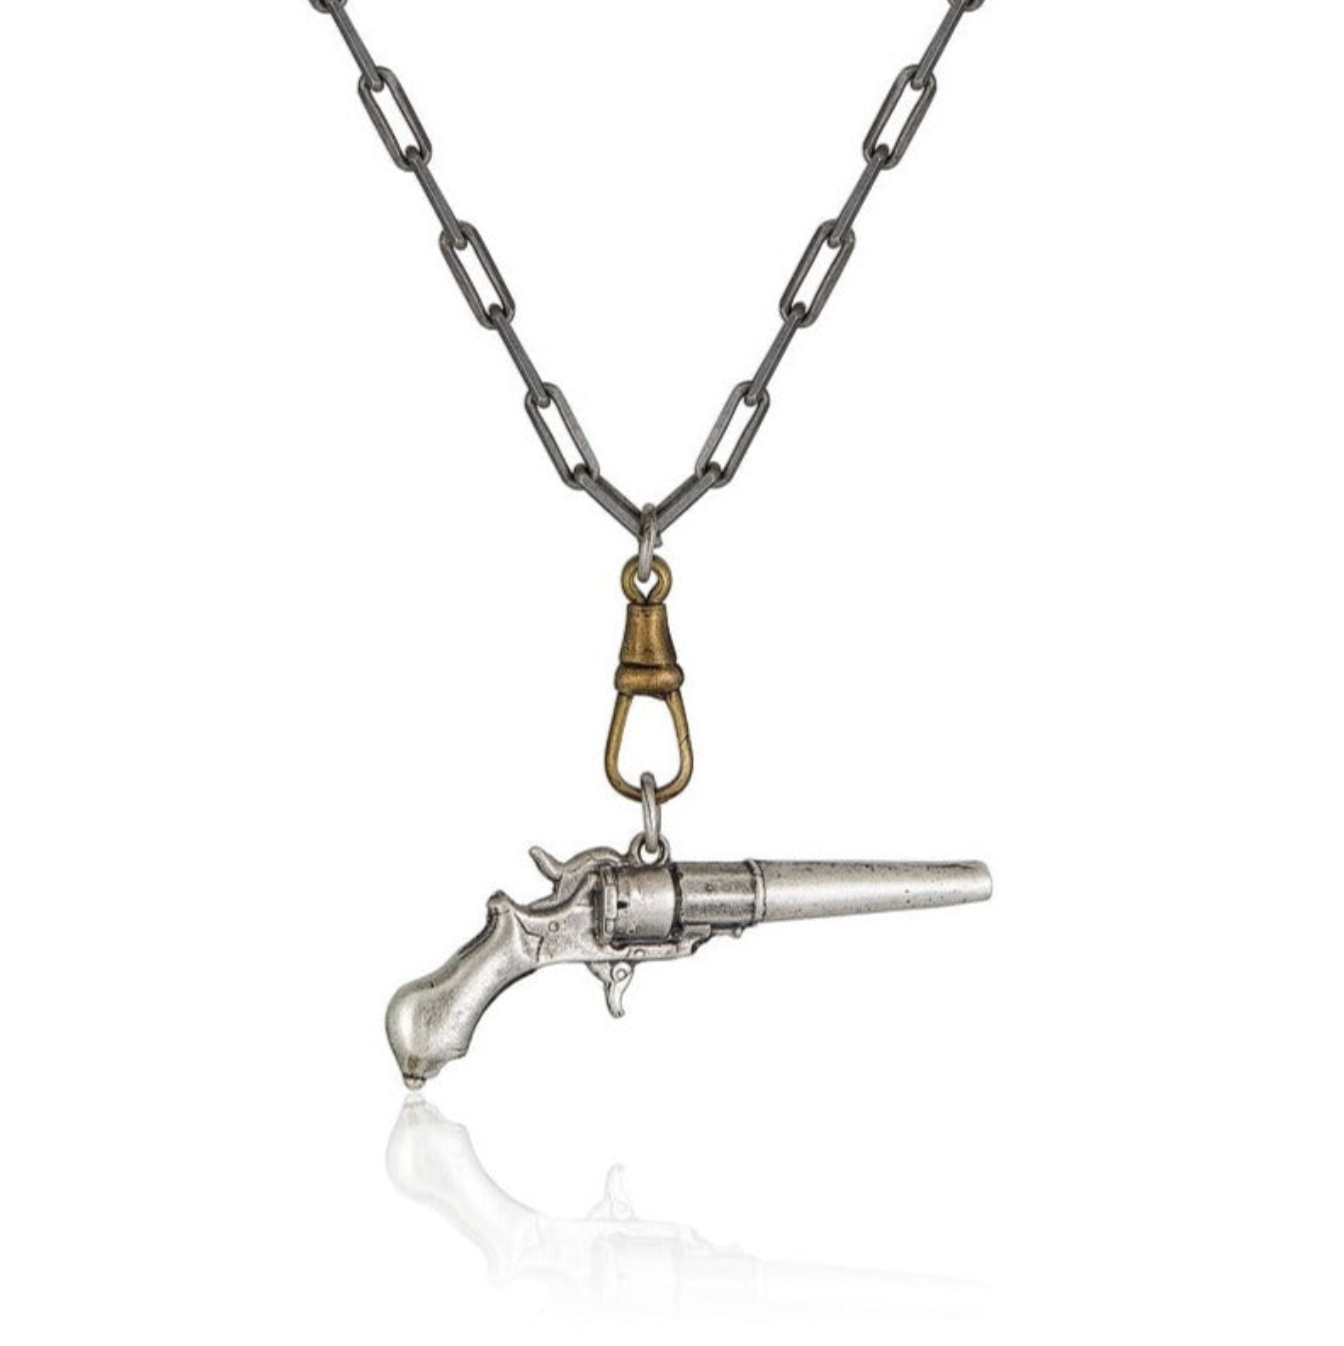 Cartography - Godfather Time Gun Necklace